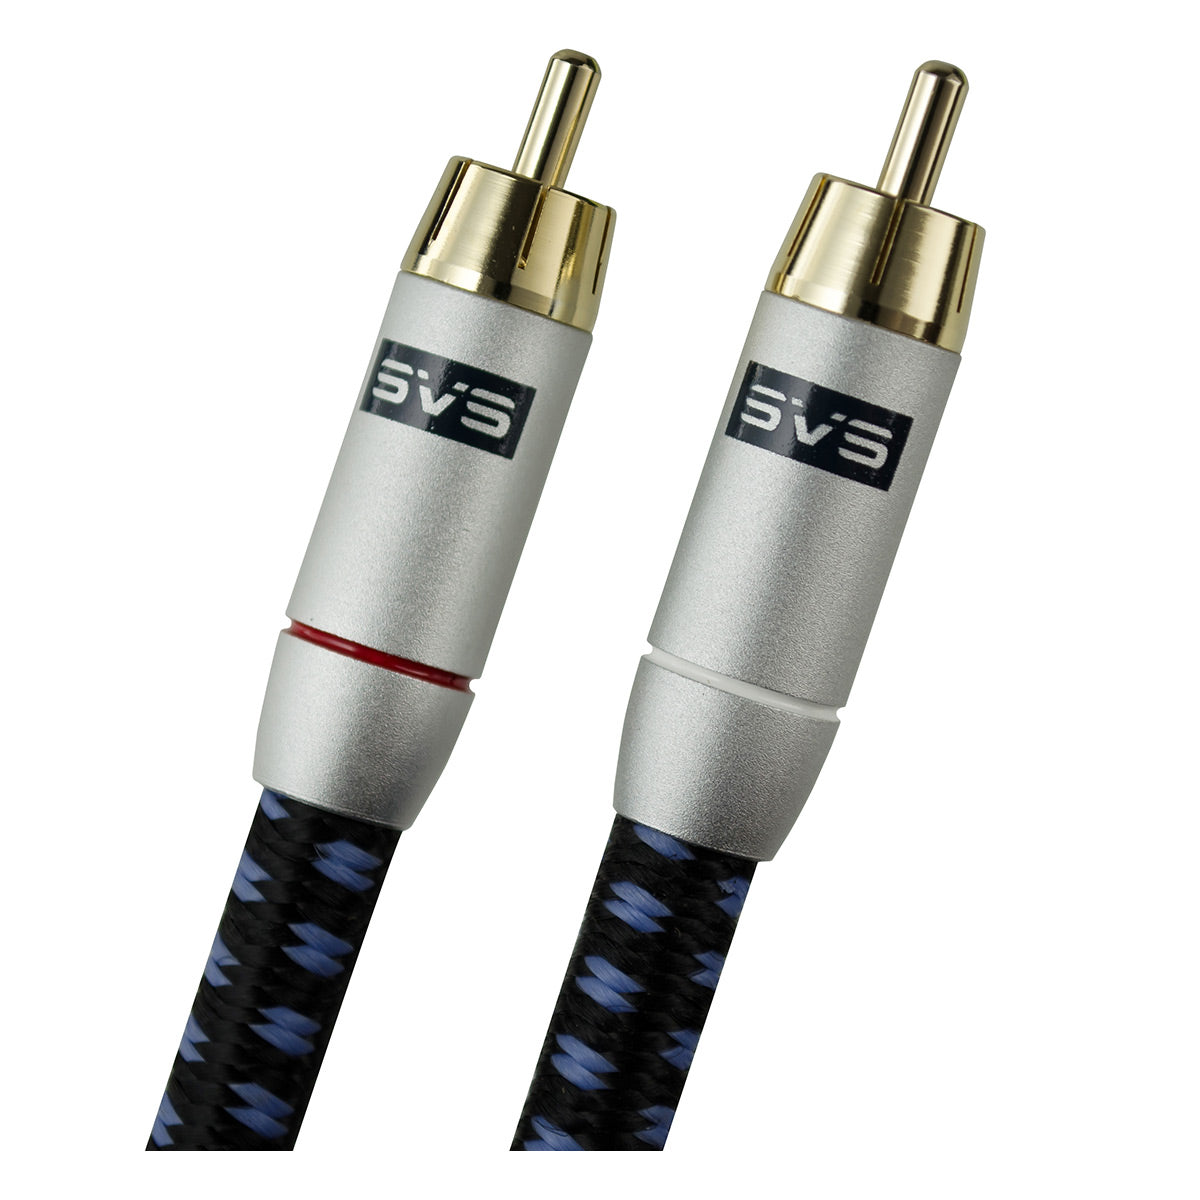 SVS SoundPath RCA Audio Interconnect Cable for Subwoofers - 26.24 ft. (8m)